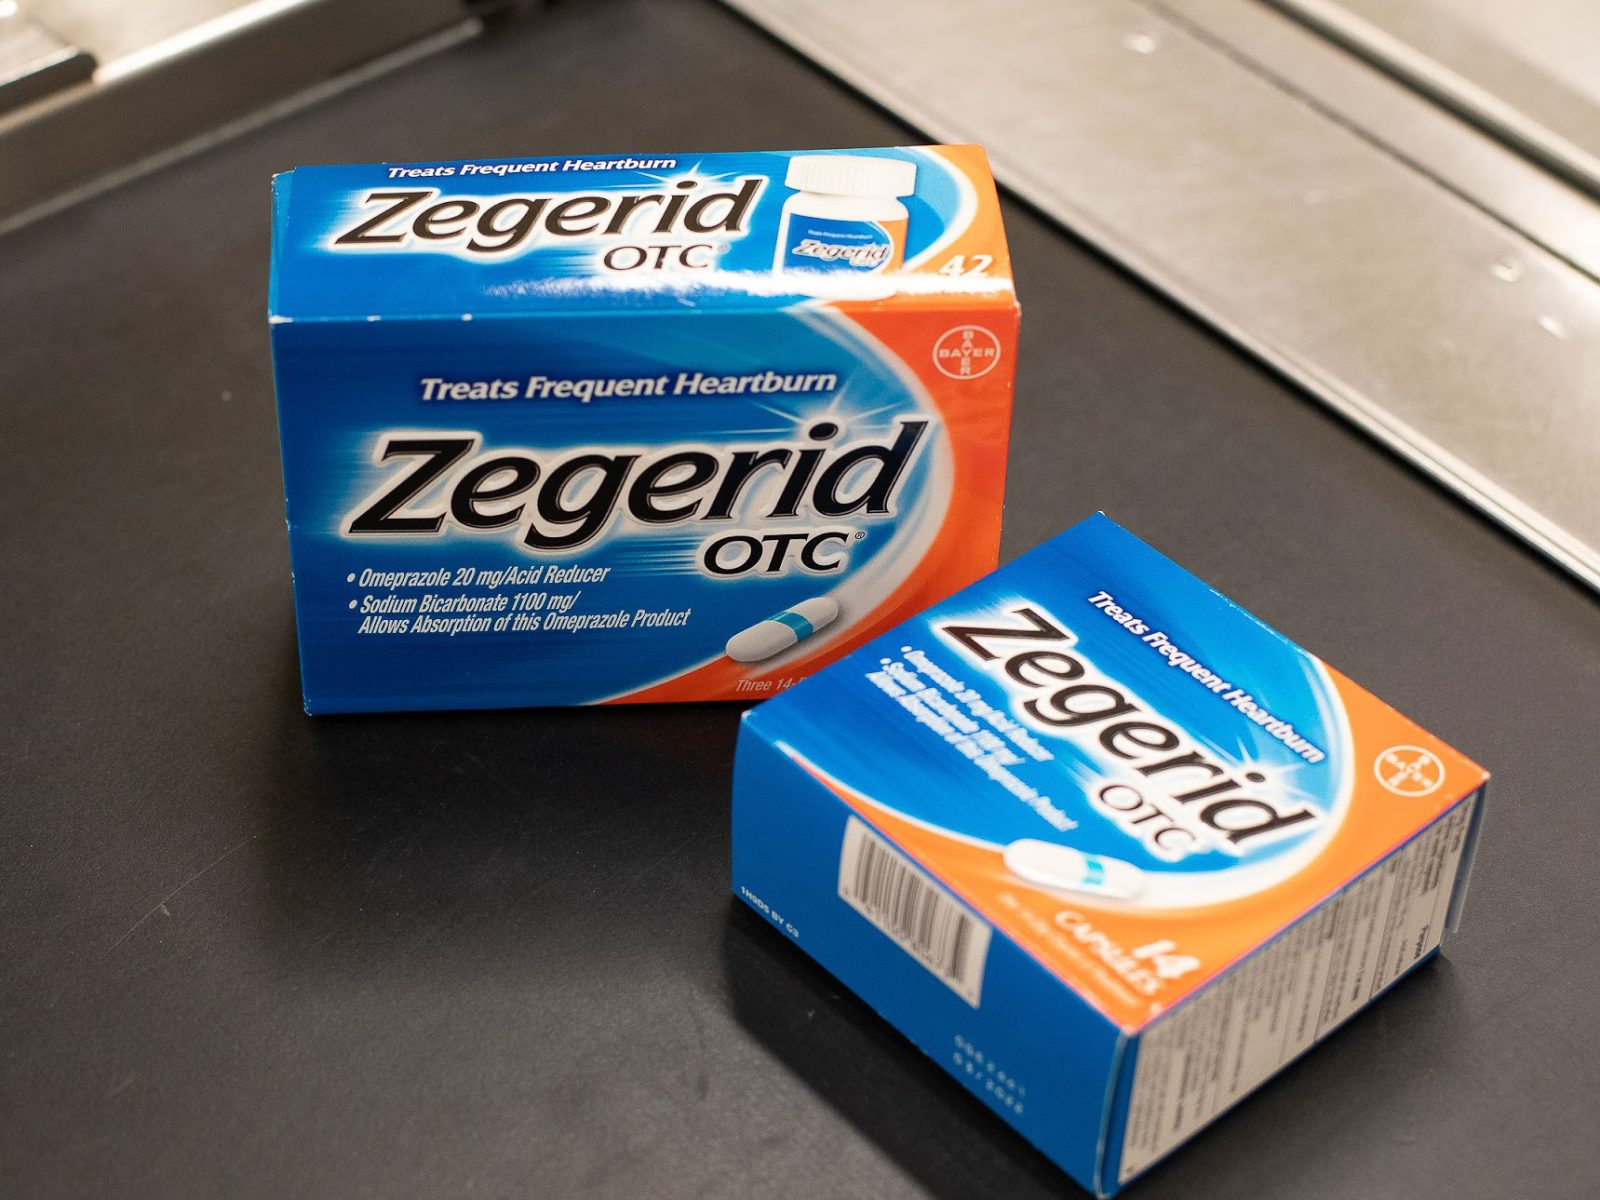 New Zegerid Coupon Makes Boxes As Low As $5.49 At Kroger (Regular $11.49)